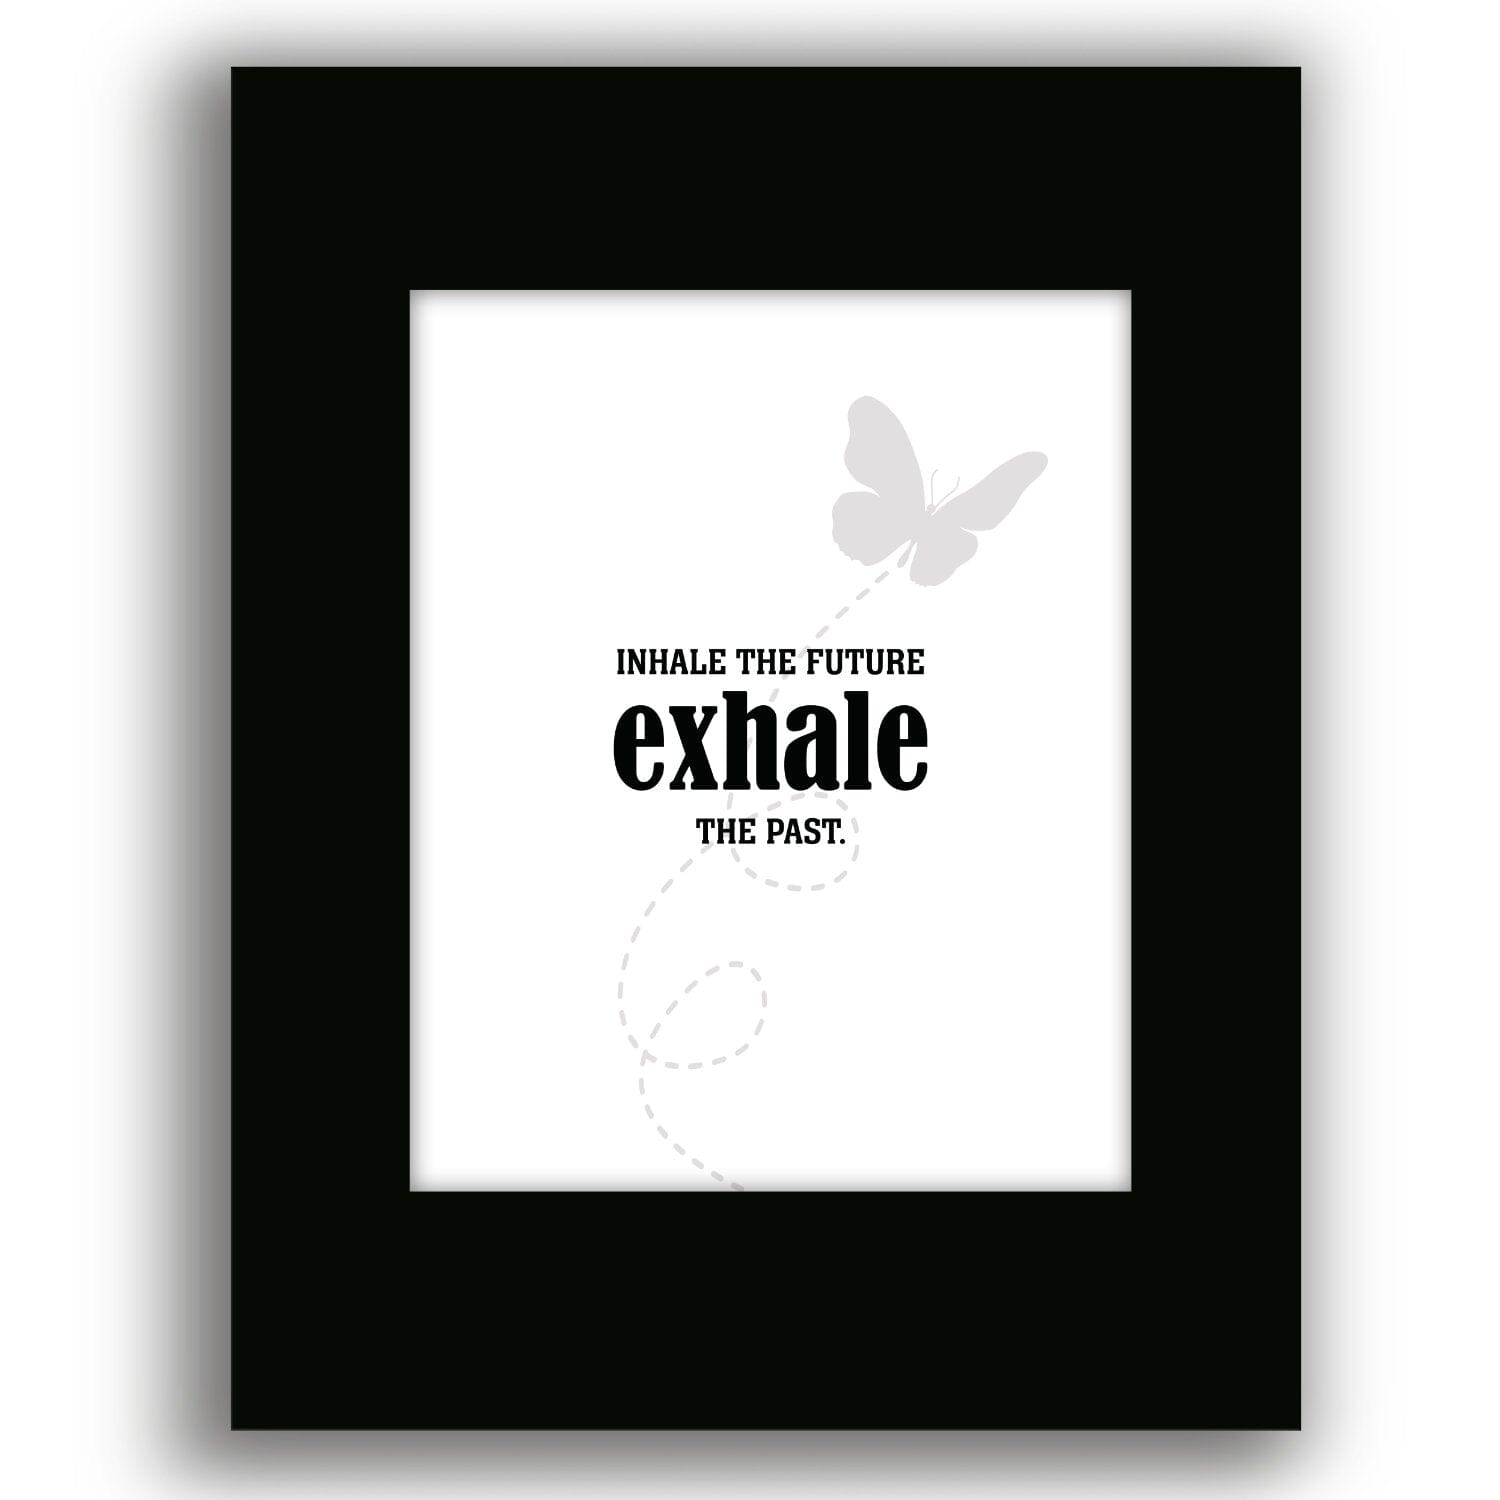 Inhale the Future, Exhale the Past - Wise and Witty Art Wise and Wiseass Quotes Song Lyrics Art 